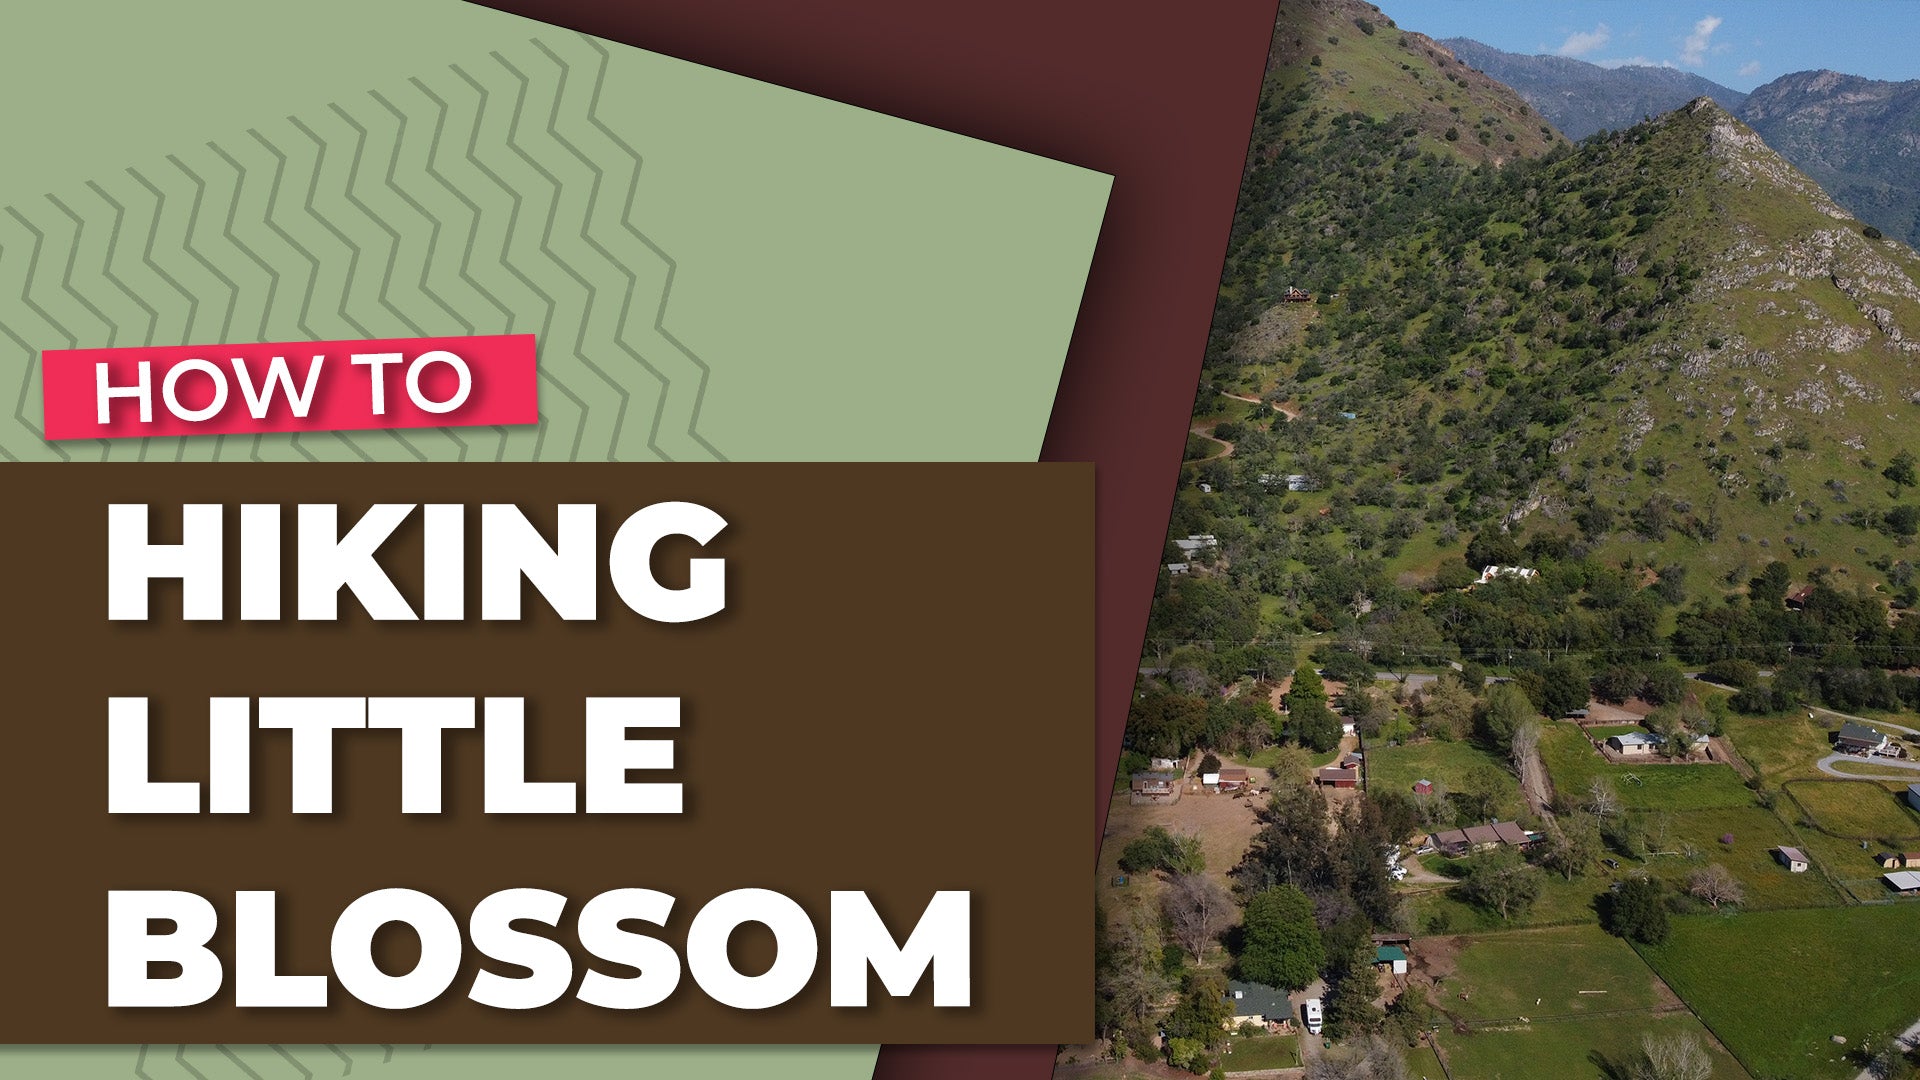 Hiking Up to Little Blossom